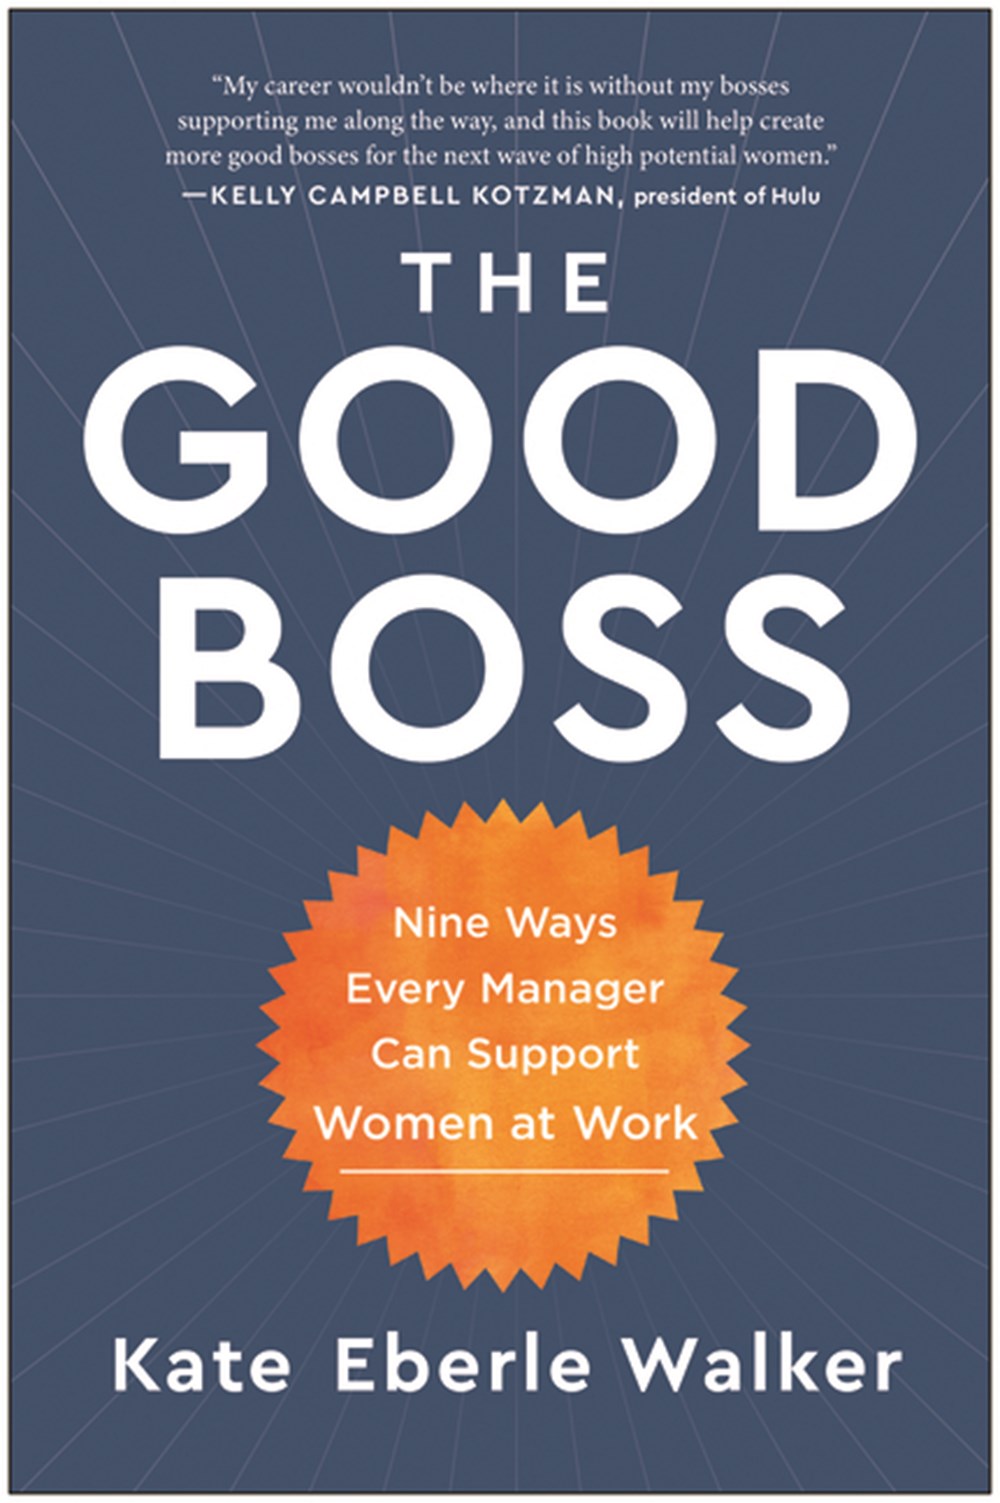 Good Boss 9 Ways Every Manager Can Support Women at Work